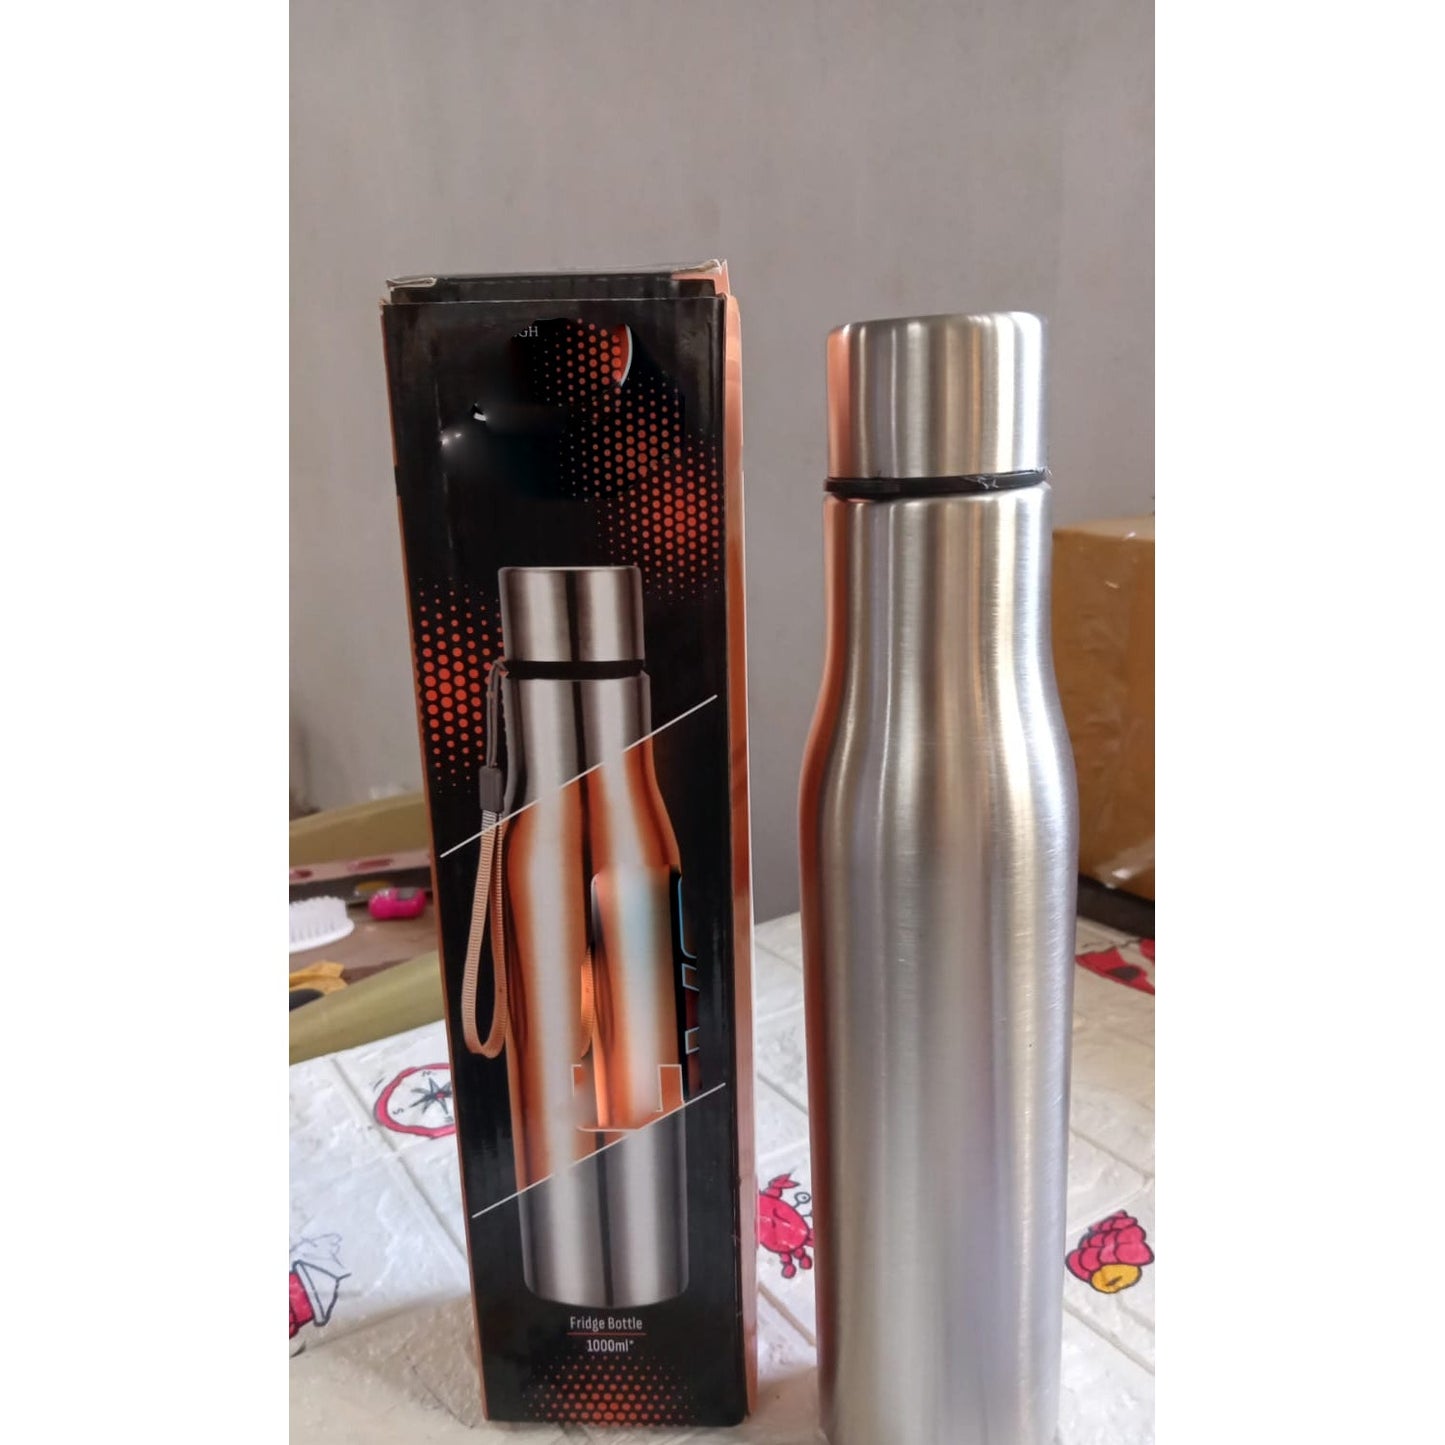 6858  Fridge Water Bottle, Stainless Steel Water Bottles, Flasks for Tea Coffee, Hot & Cold Drinks, BPA Free, Leakproof, Portable For office/Gym/School 1000 ML